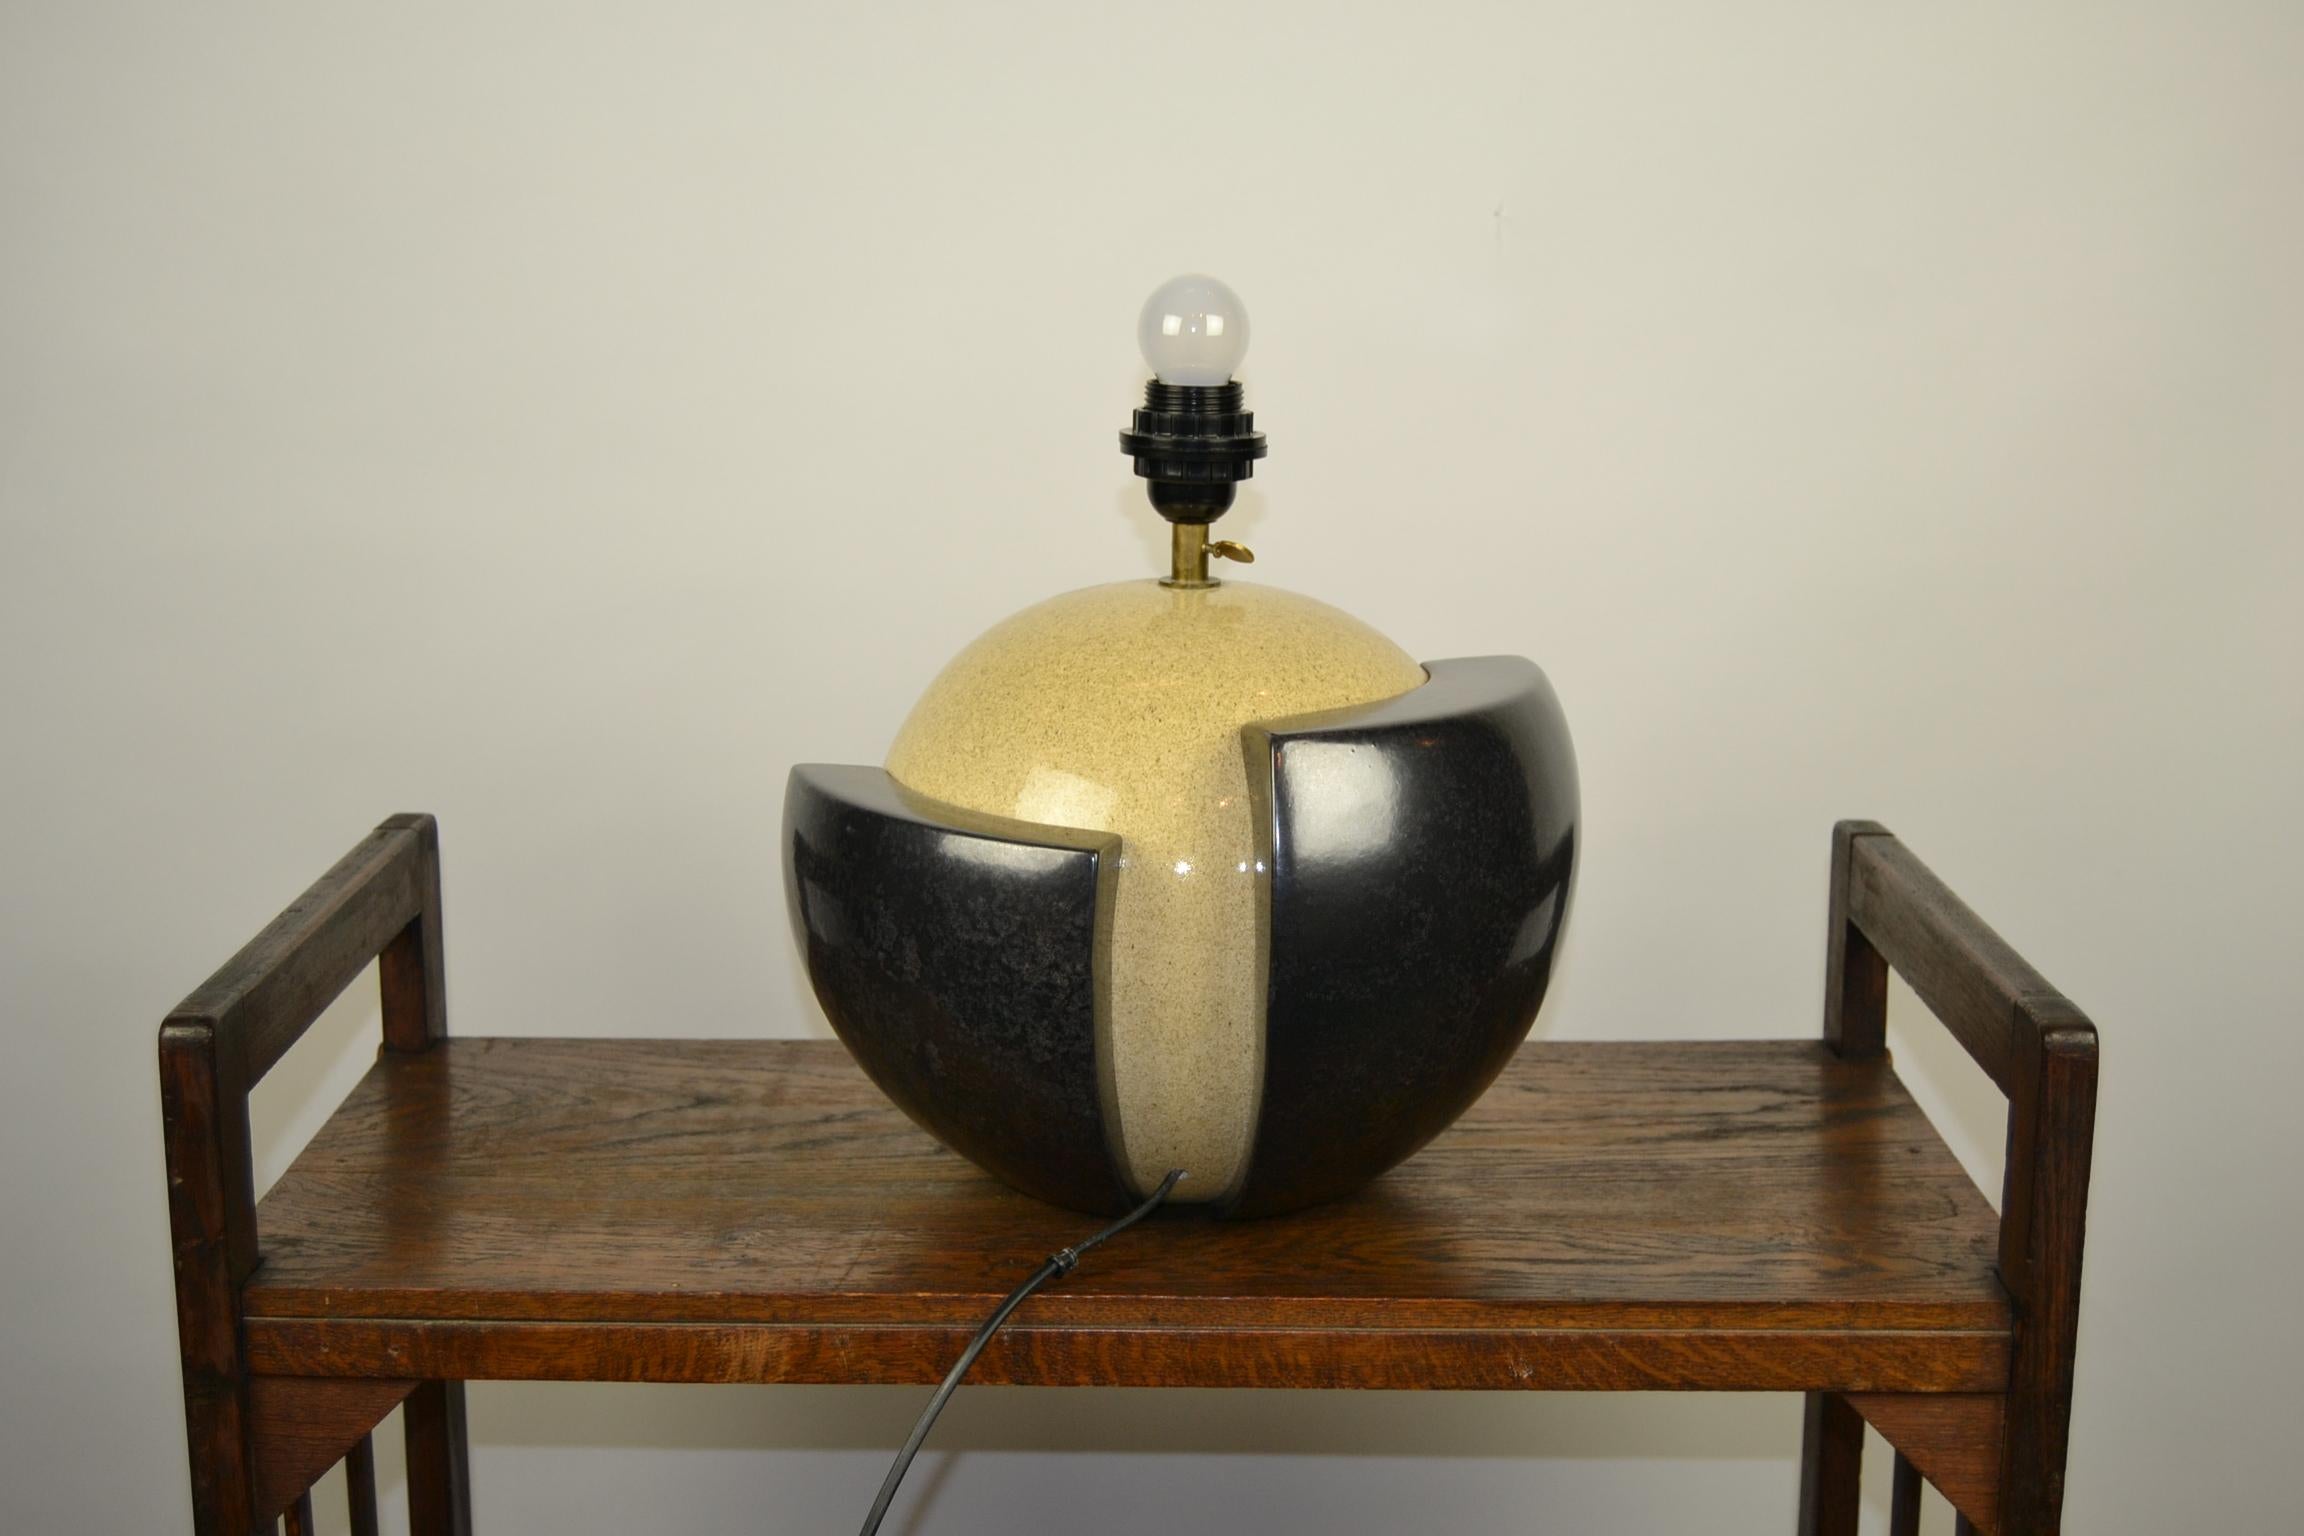 Ying Yang table lamp - desk lamp. Round shape with layers in the colors beige and black / antracite grey.
This vintage 1980s table light is adjustable in height by the copper shaft.
The 2 colored base is a kind of ceramic.
This lamp foot is sold